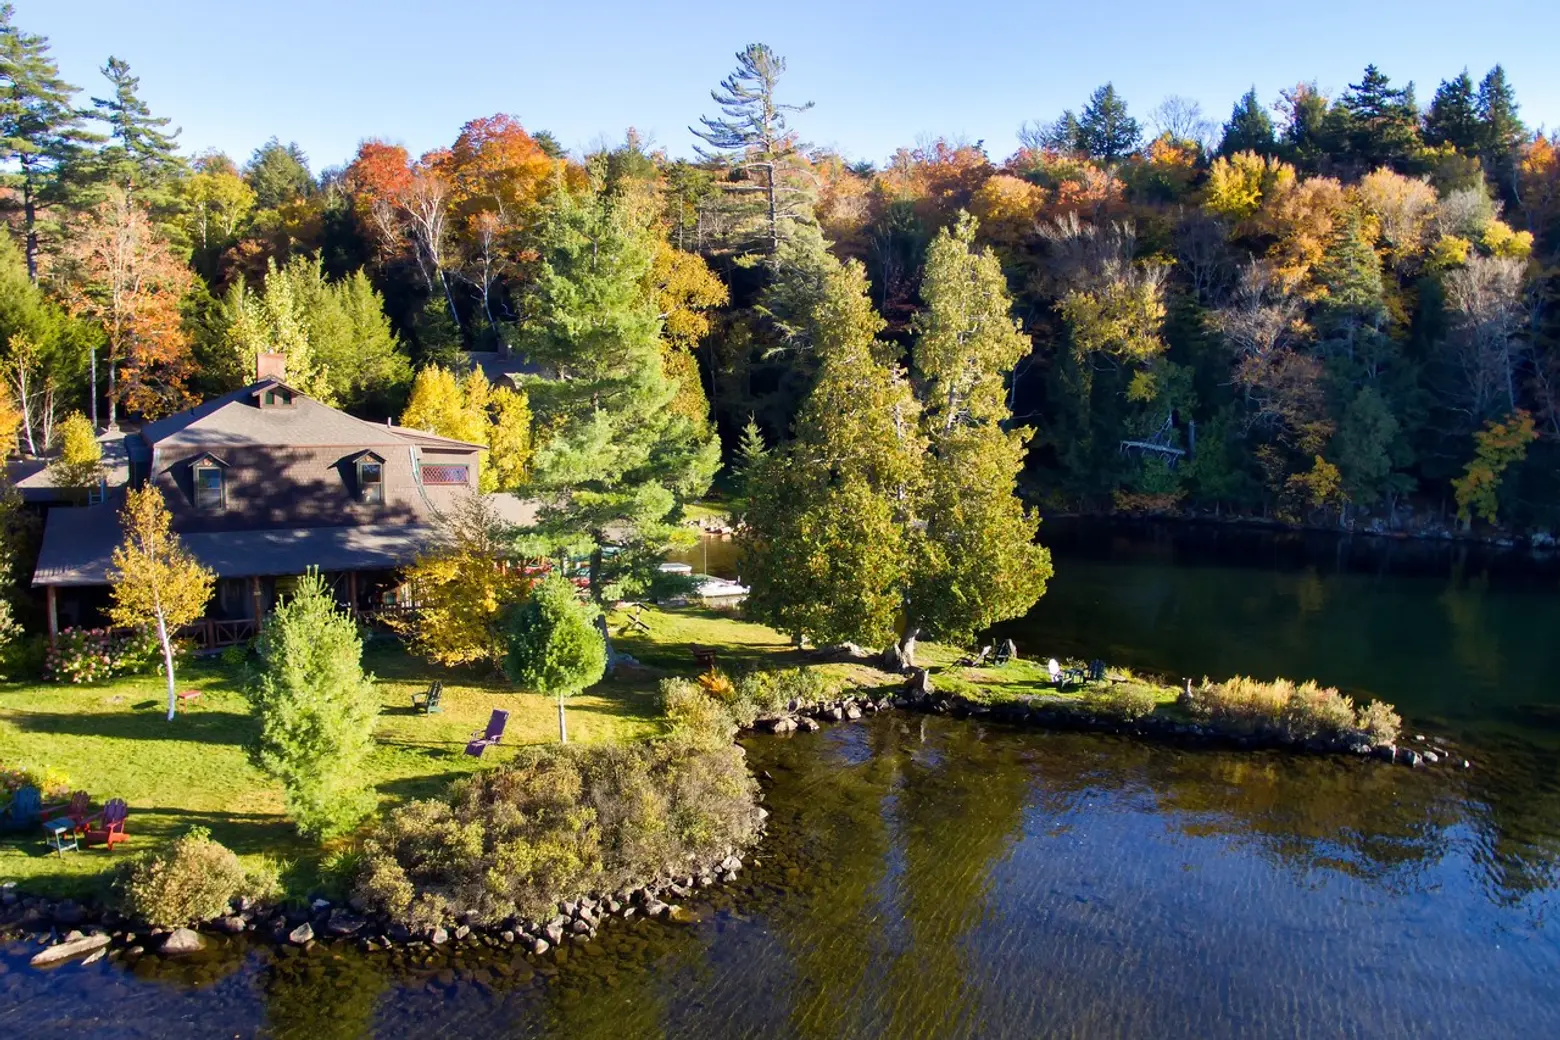 122 Hedges Road, Blue Mountain Lake NY, The Hedges of Blue Mountain Lake, Adirondacks camps, Adirondacks real estate